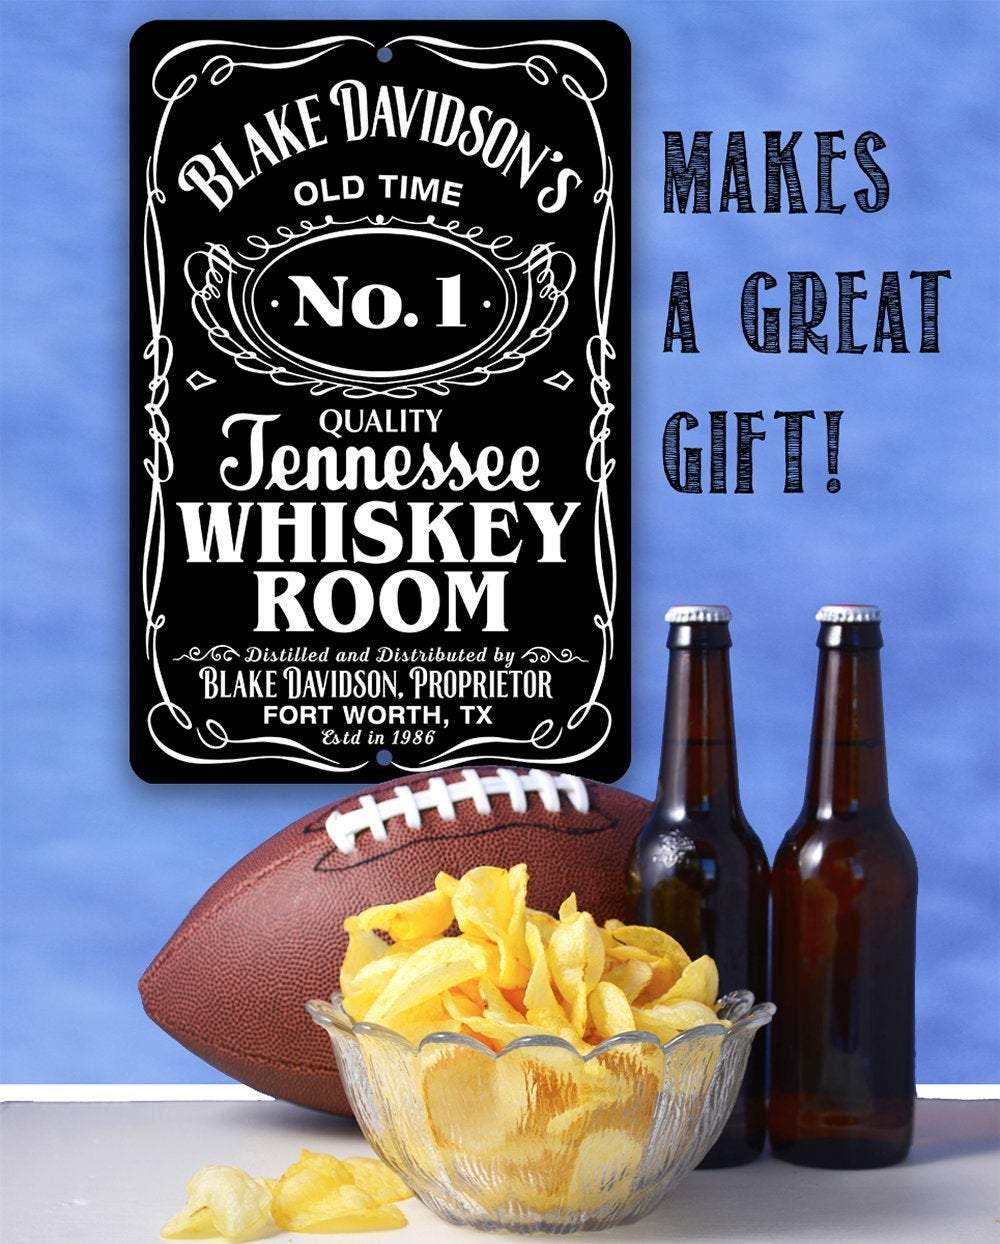 Personalized - Whiskey Room - Metal Sign | Lone Star Art.